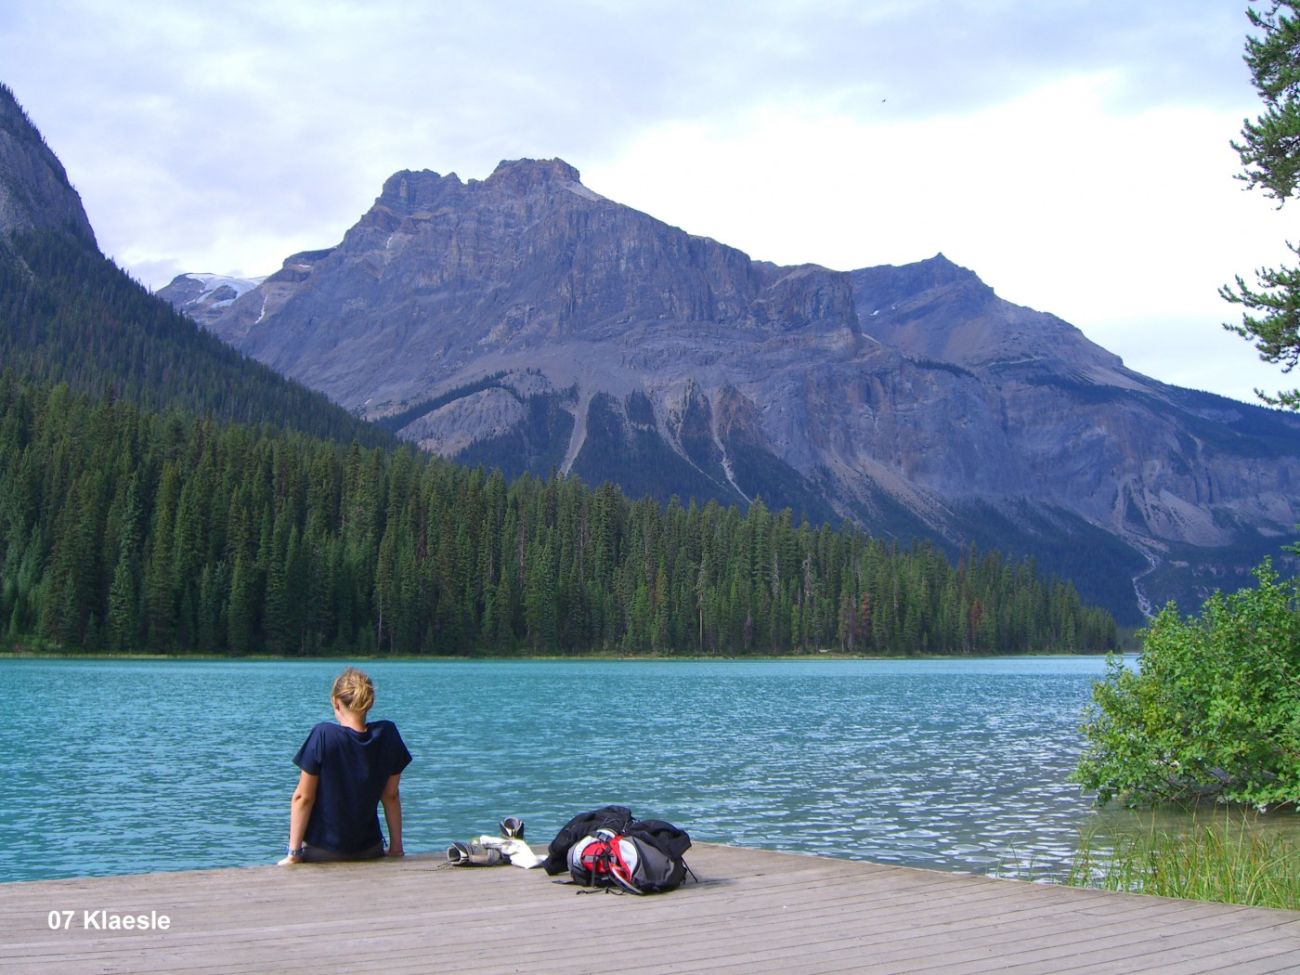 hiking tour in canadian rocky mountains | wanderurlaub in den kanadischen rocky mountains